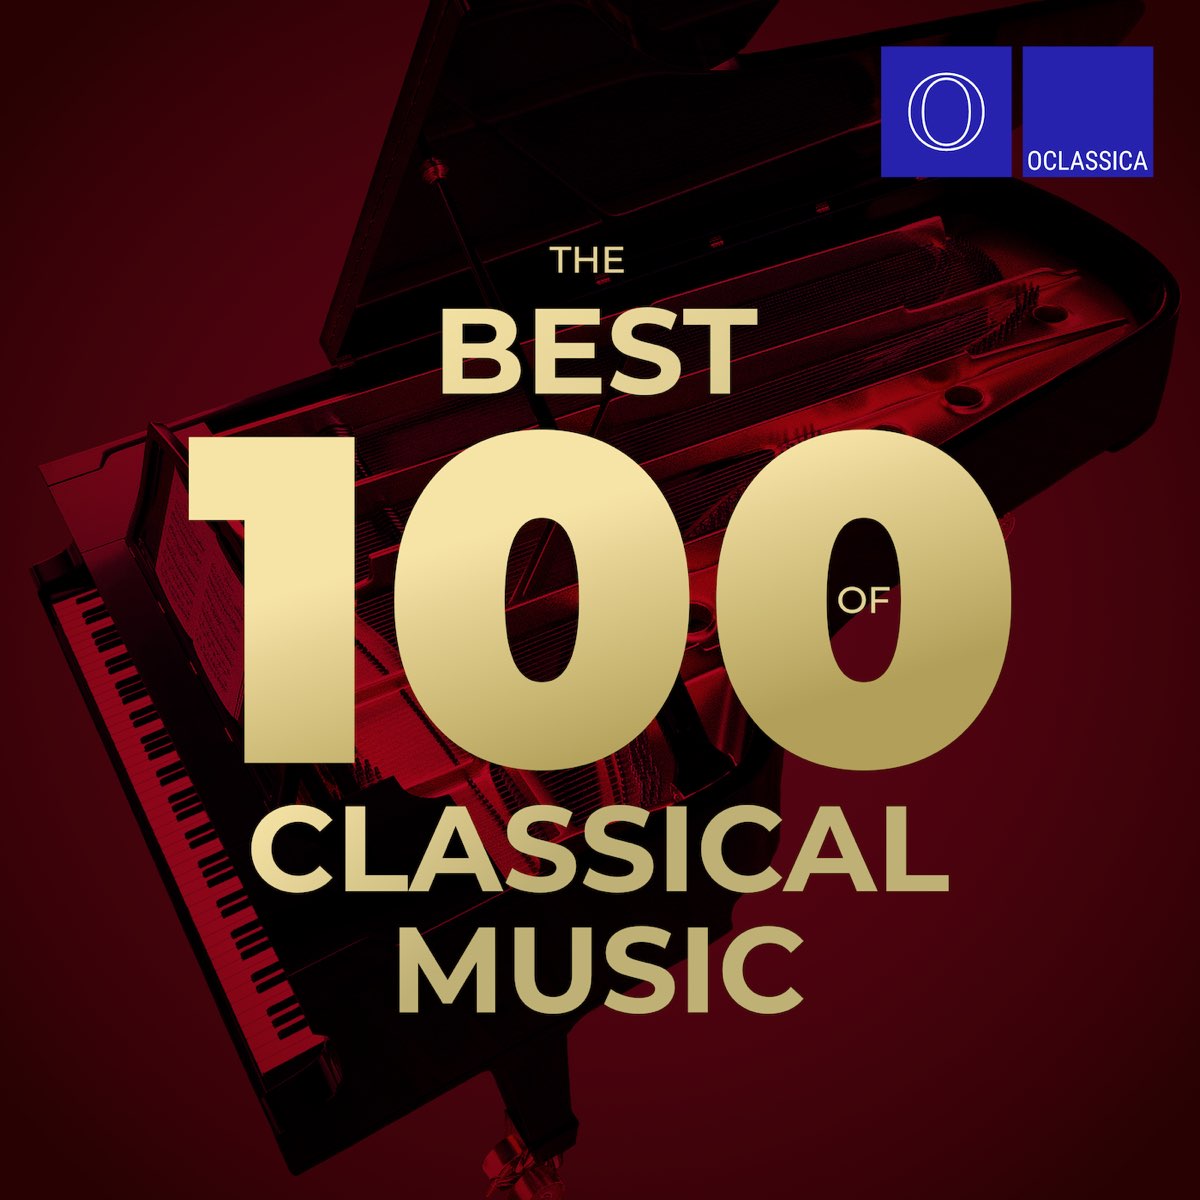 ‎The Best 100 of Classical Music by Various Artists on Apple Music